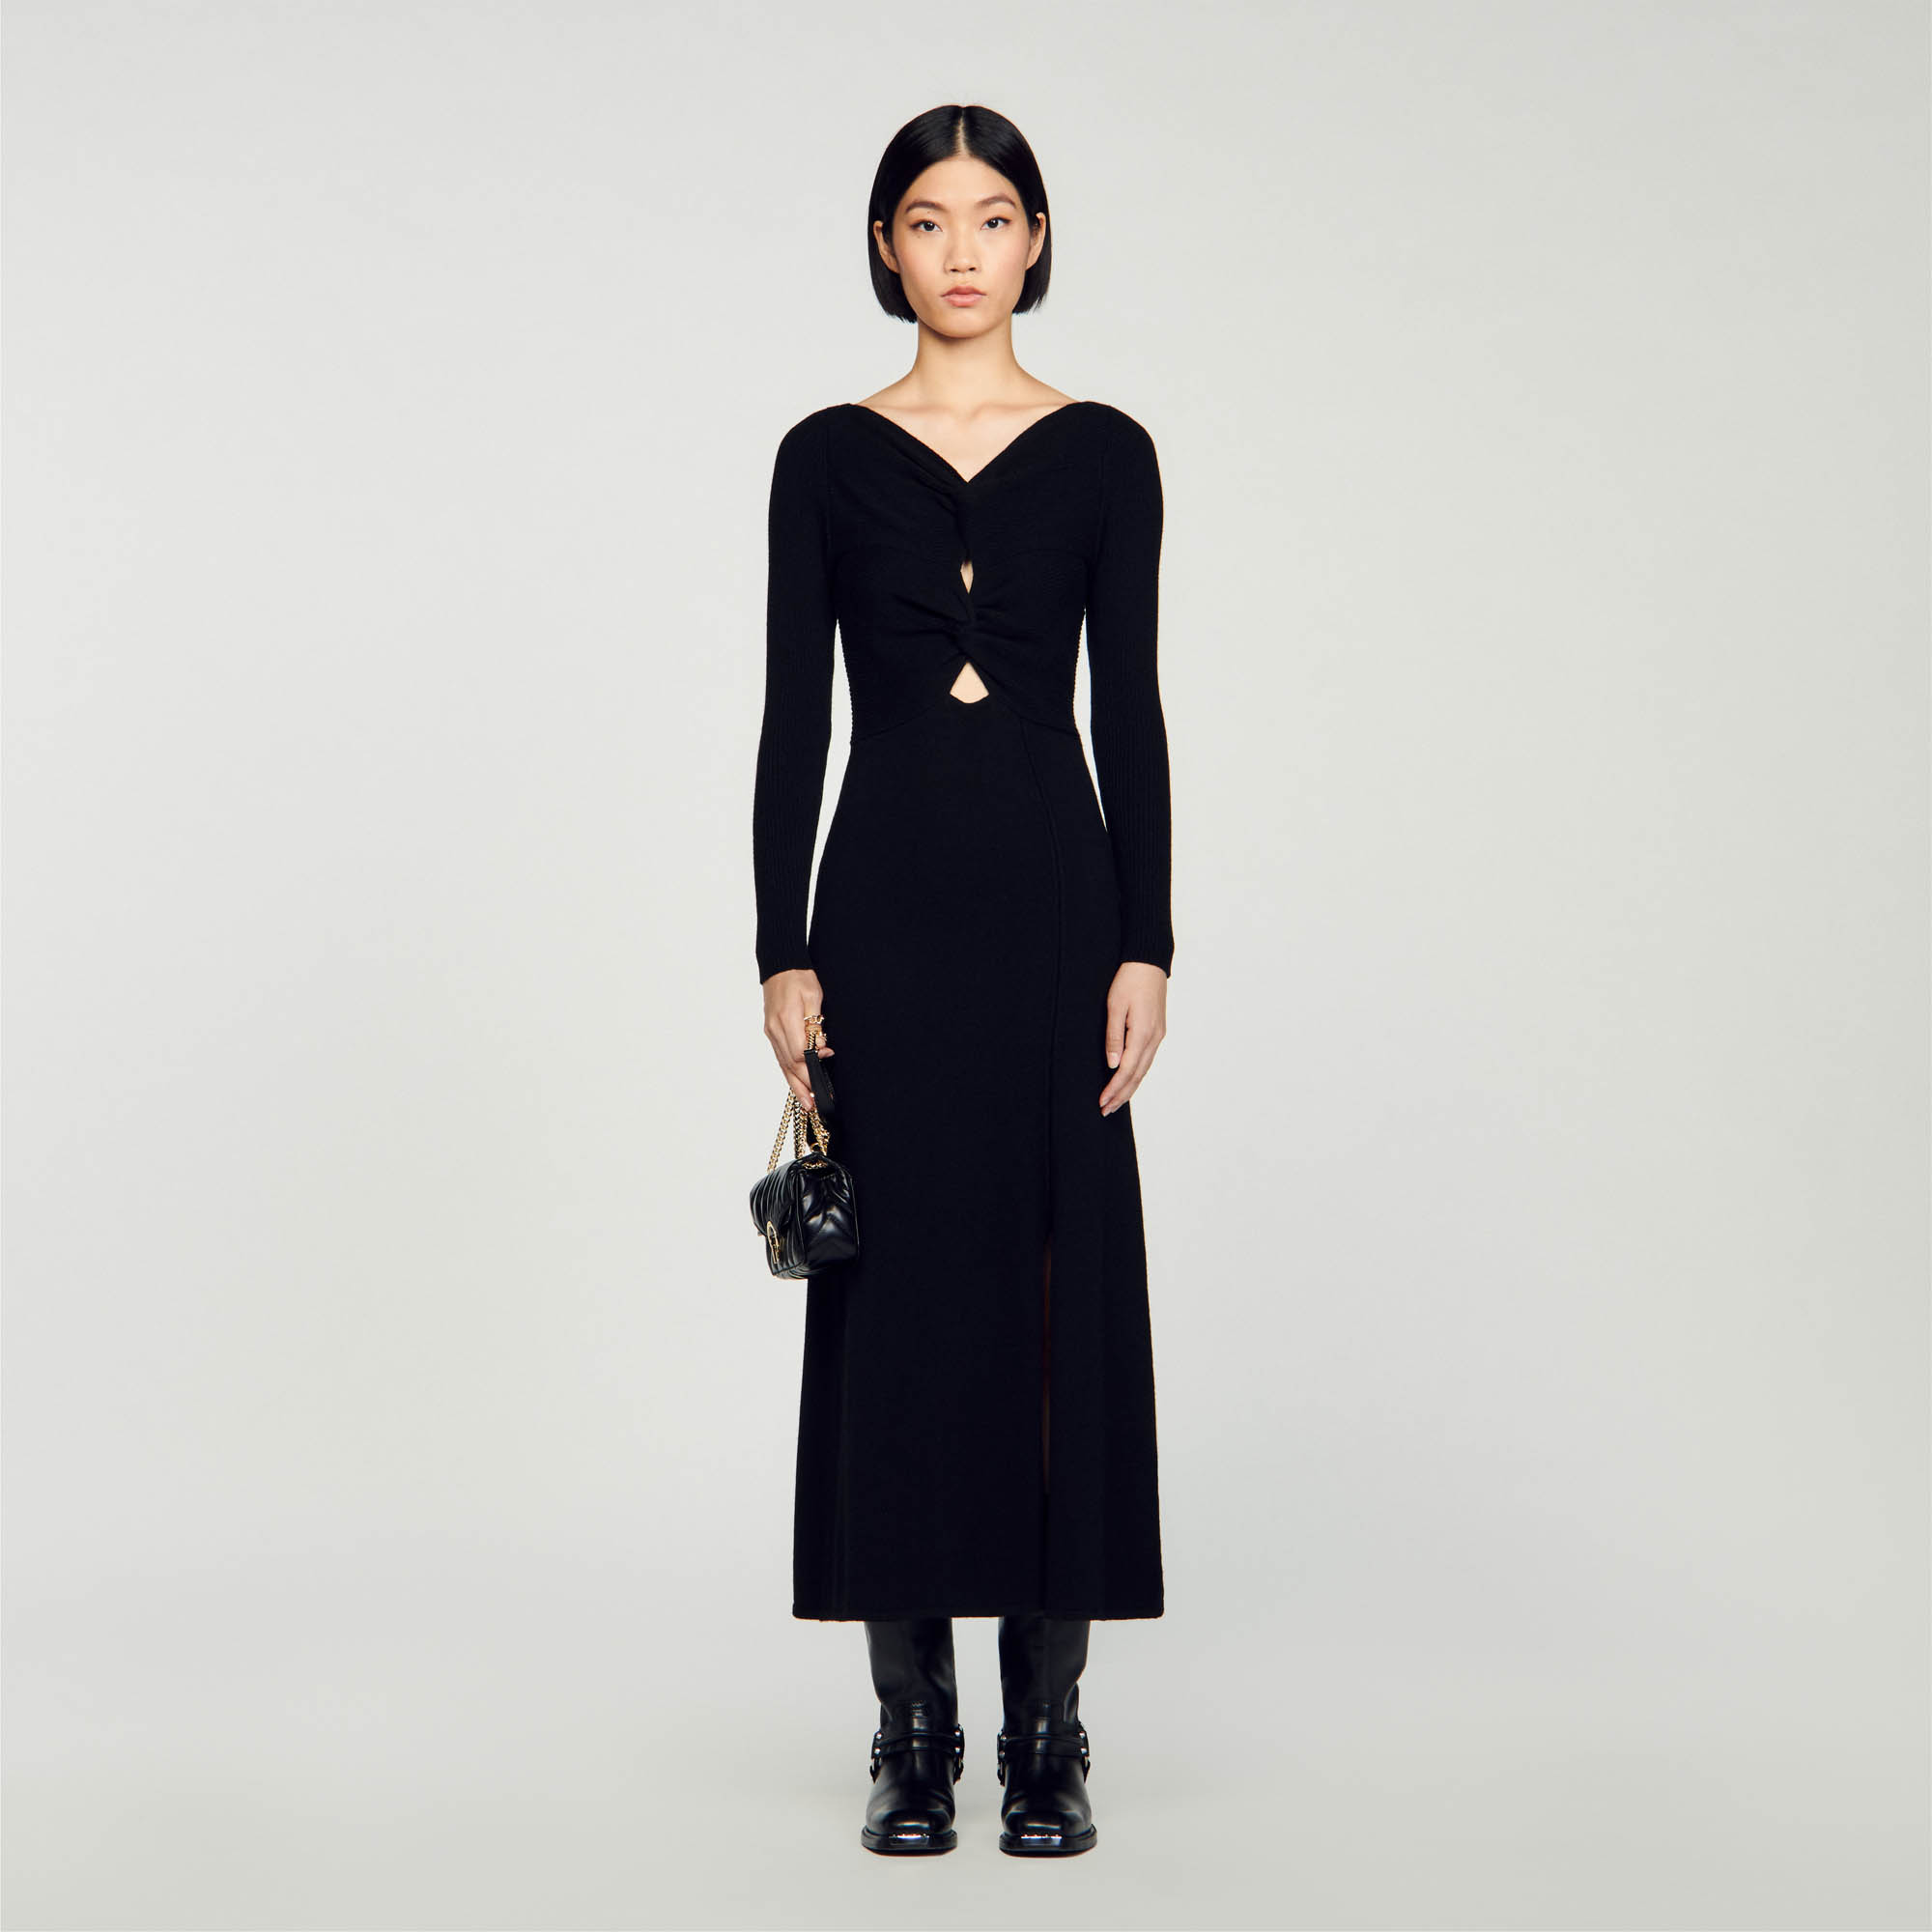 Sandro wool Maxi dress made of openwork cable knit with round neck, long sleeves and side slits